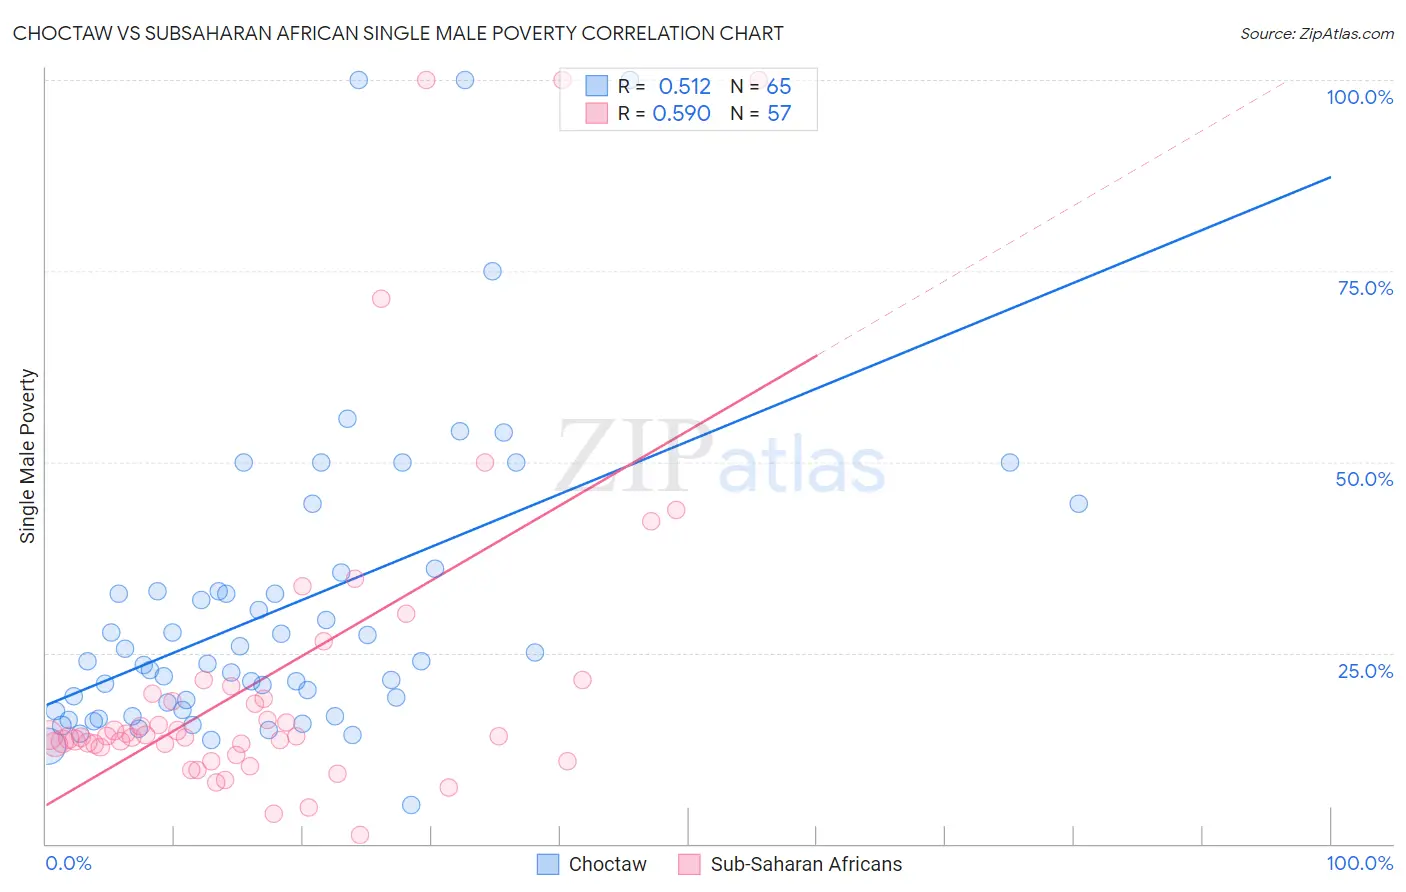 Choctaw vs Subsaharan African Single Male Poverty